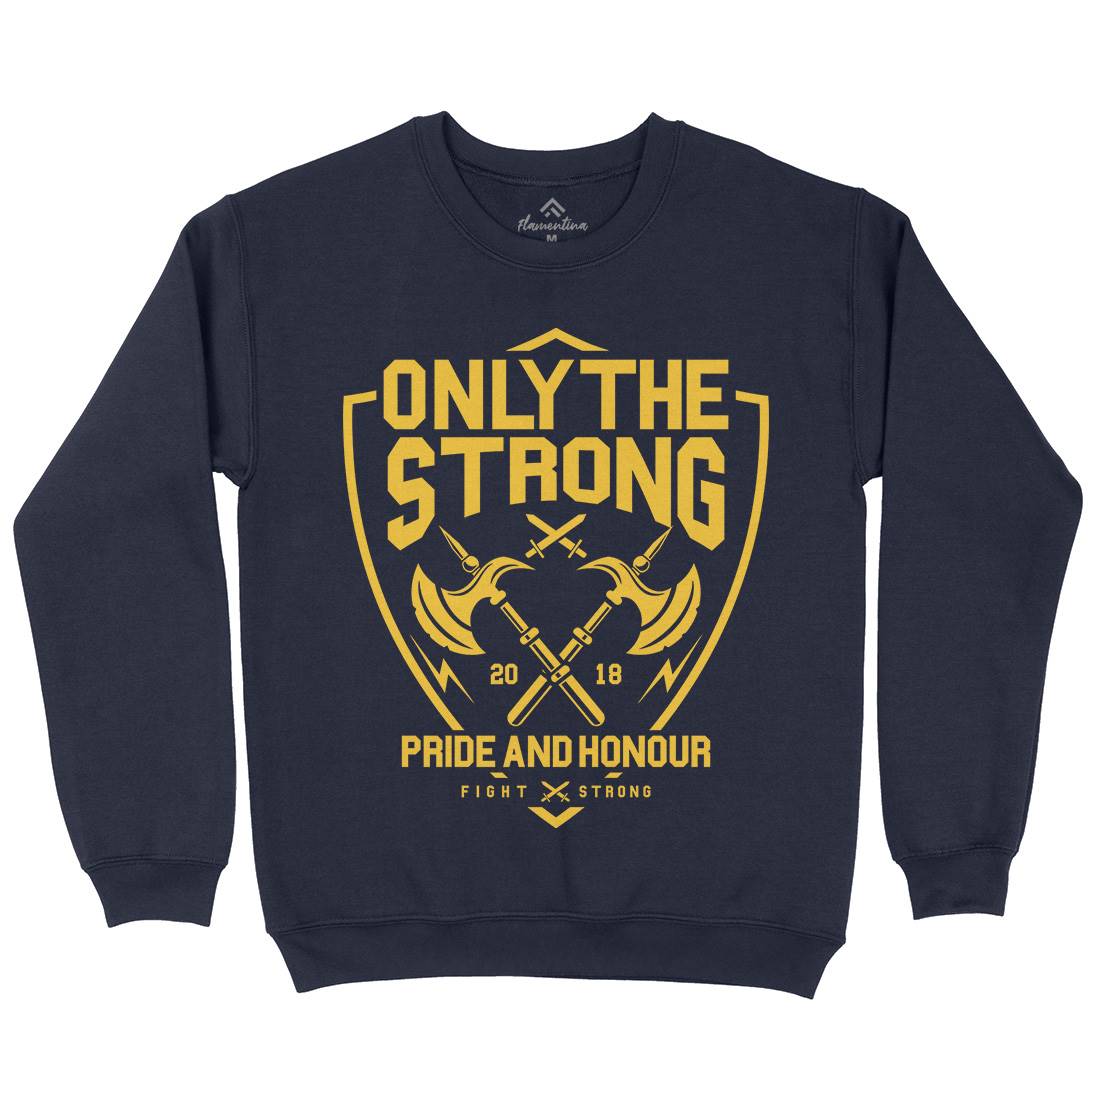 Only The Strong Kids Crew Neck Sweatshirt Quotes A257